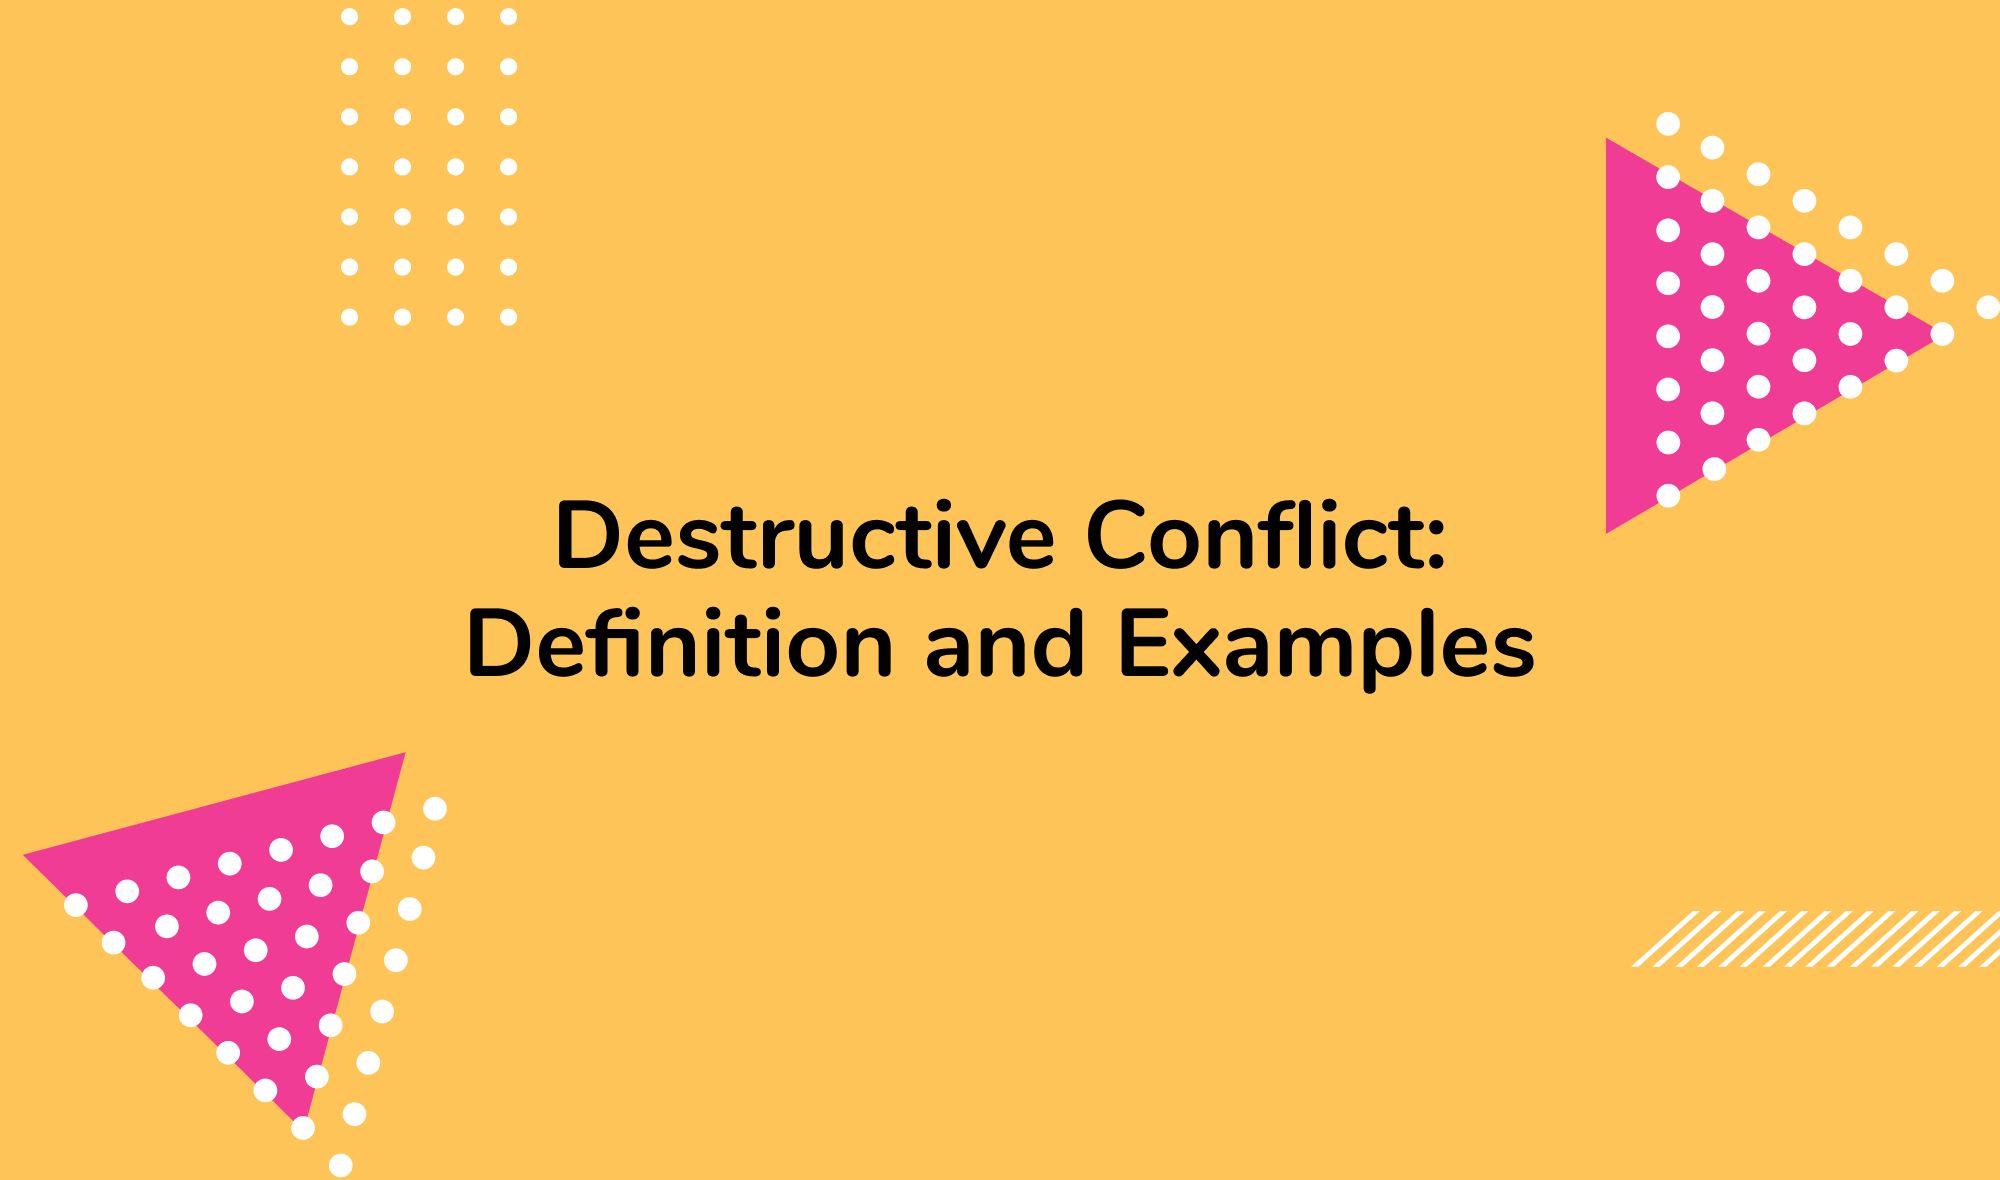 Destructive Conflict: Definition and Examples